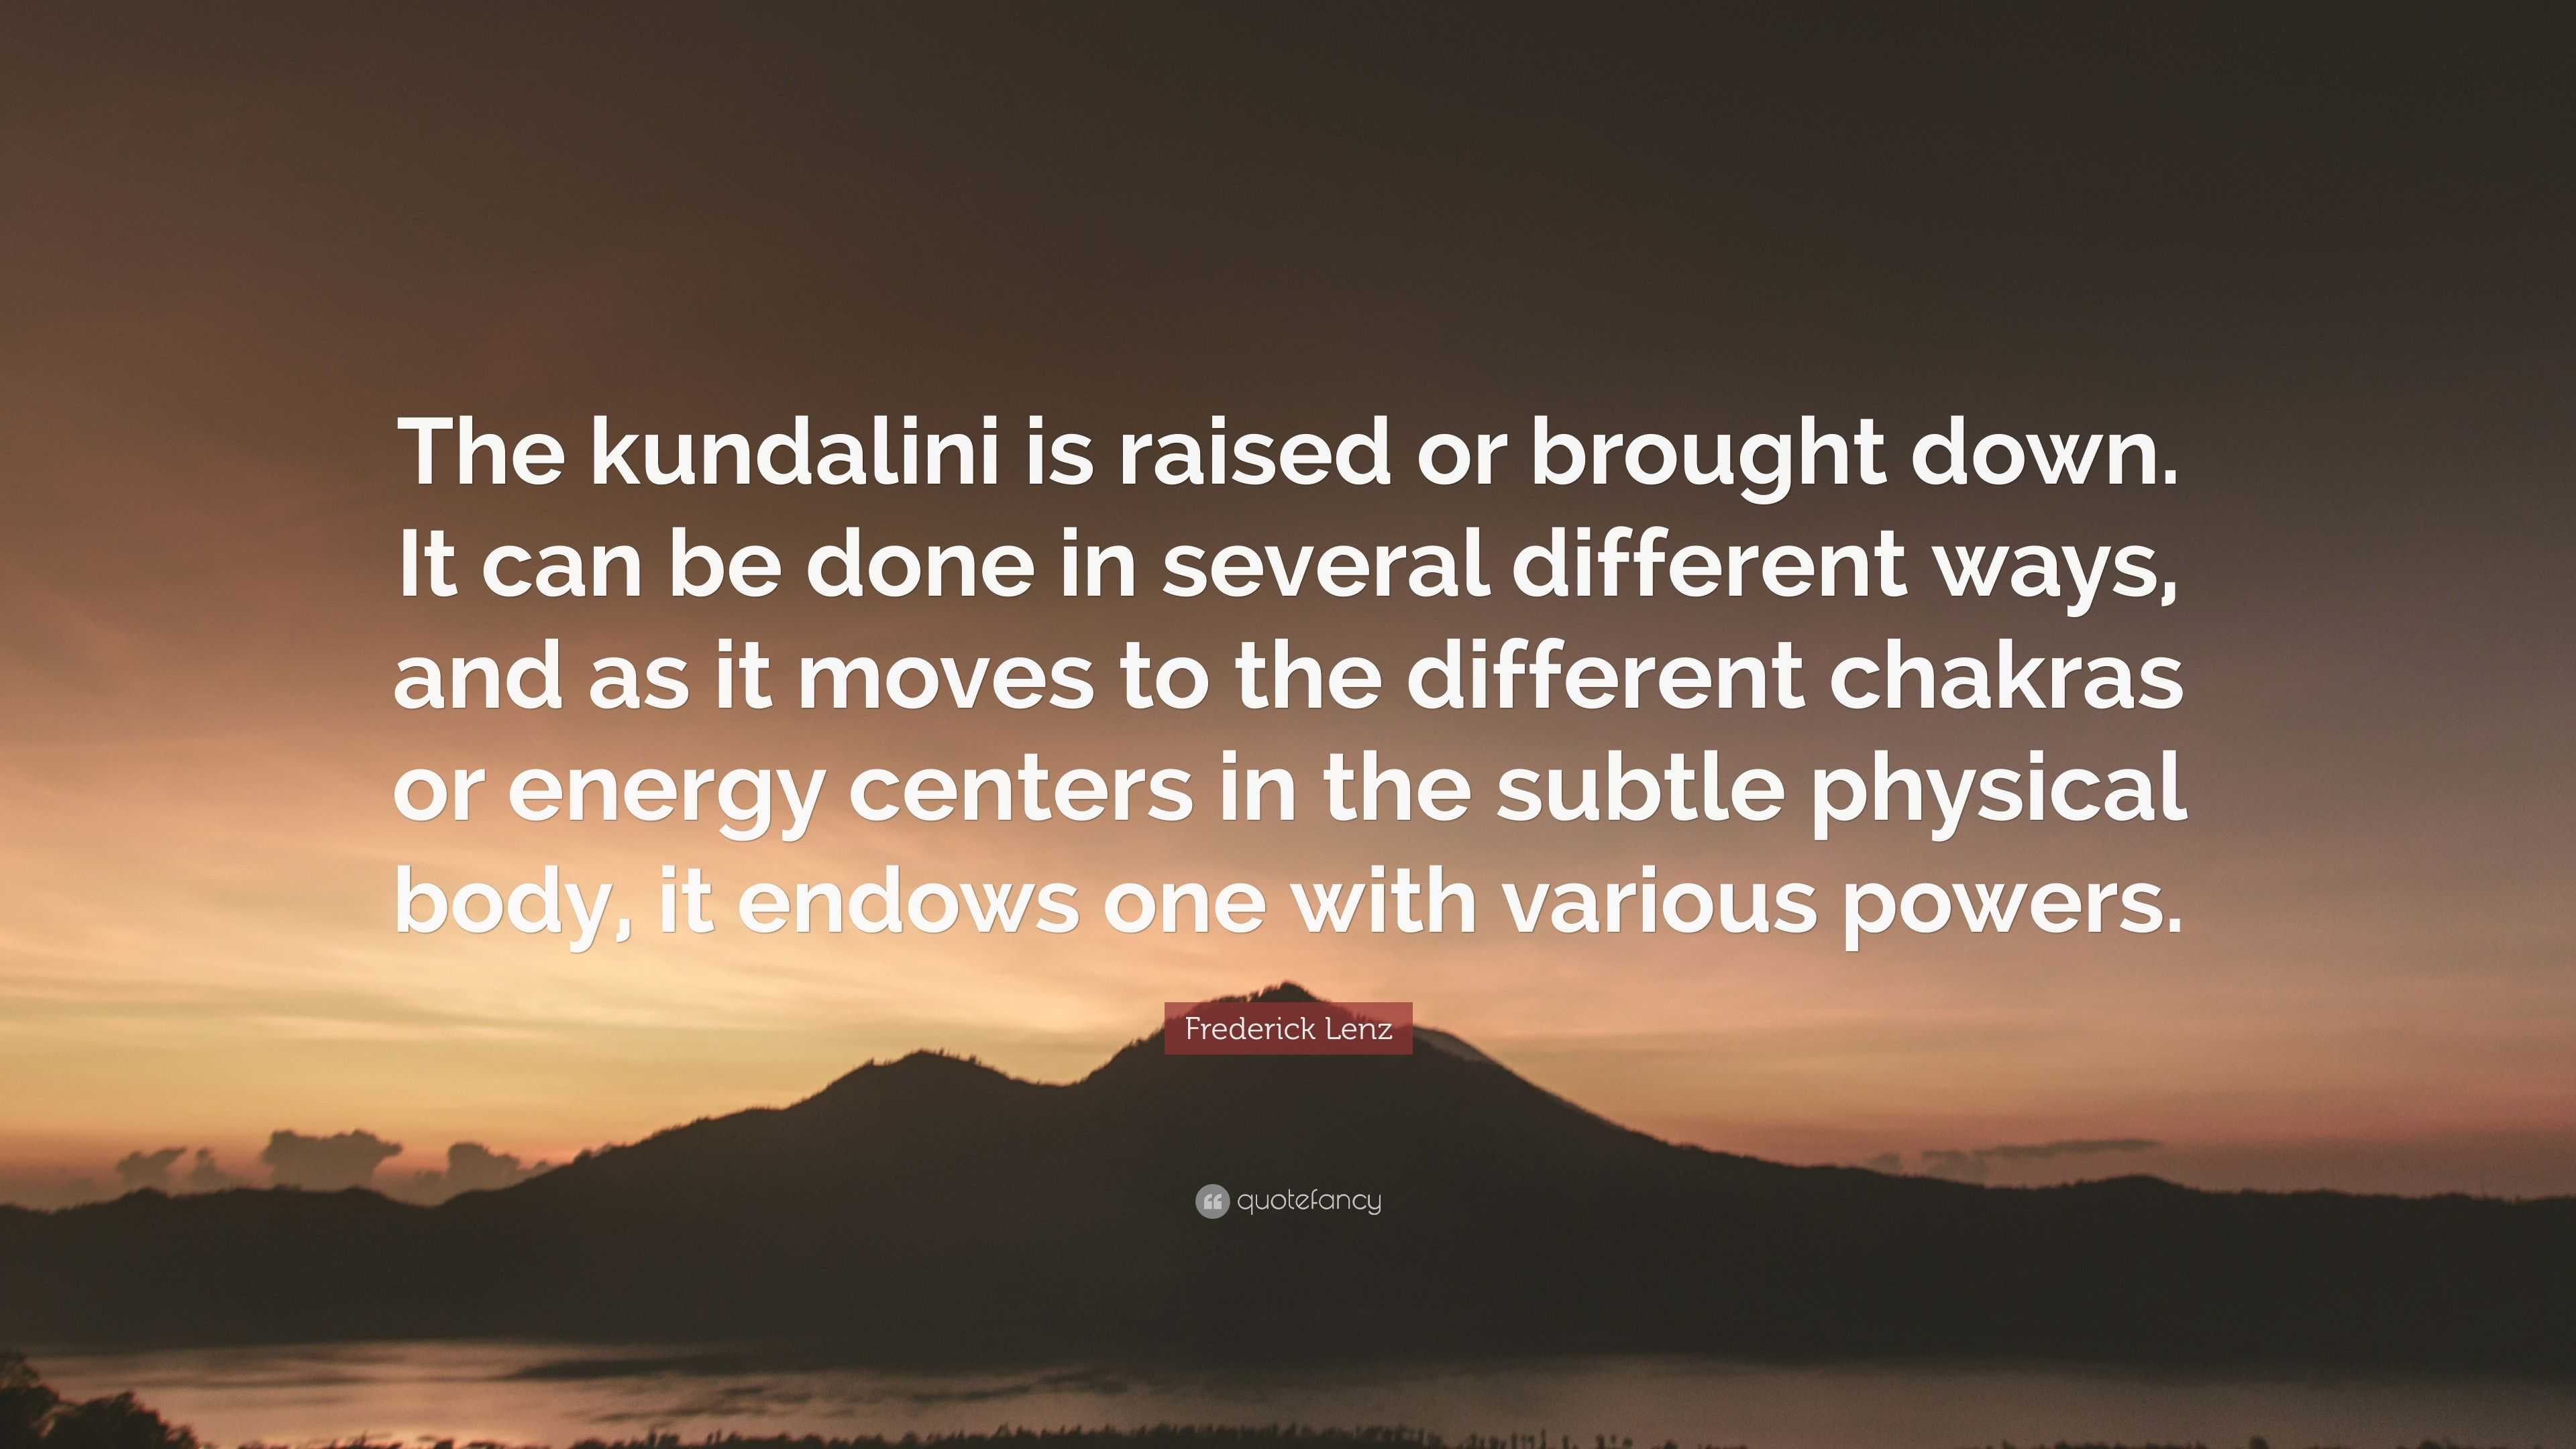 Frederick Lenz Quote: “The kundalini is raised or brought down. It can ...